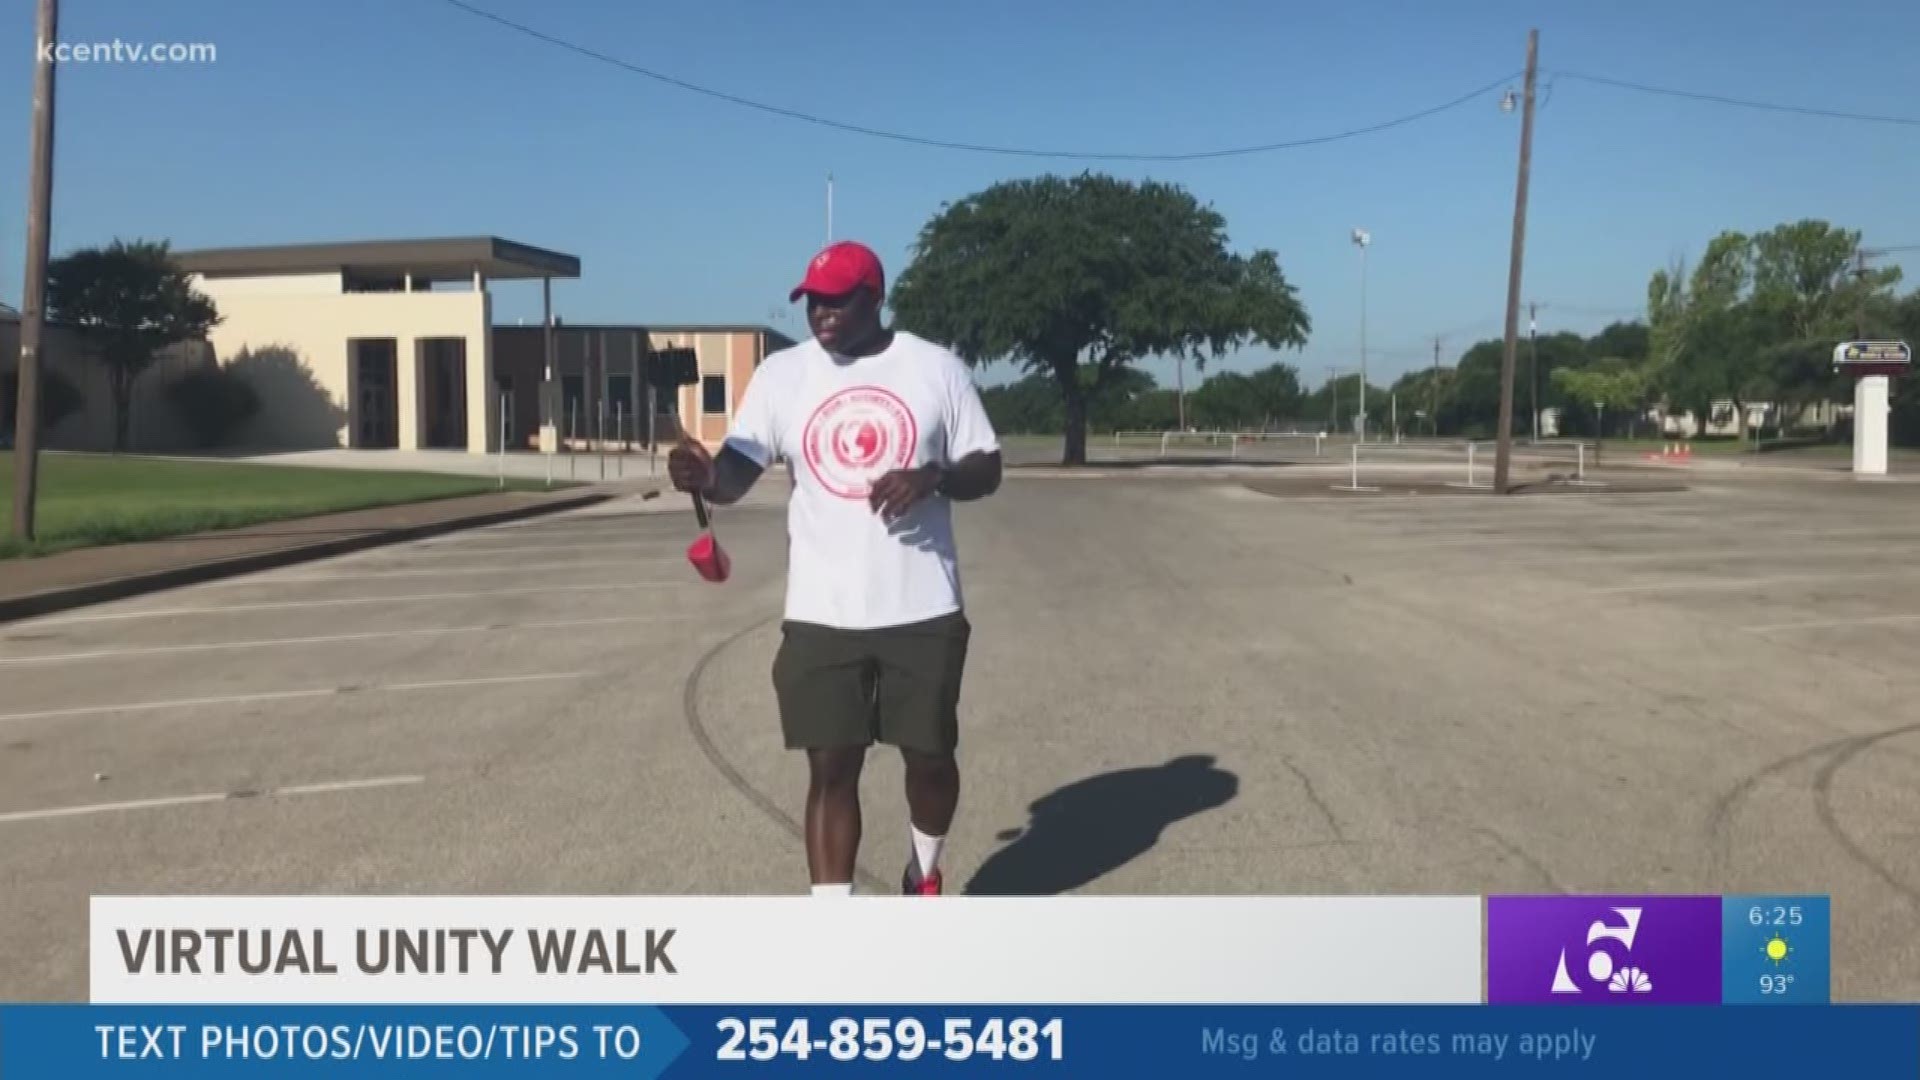 The virtual walk highlighted positive impacts and discuss how the community can become unified.